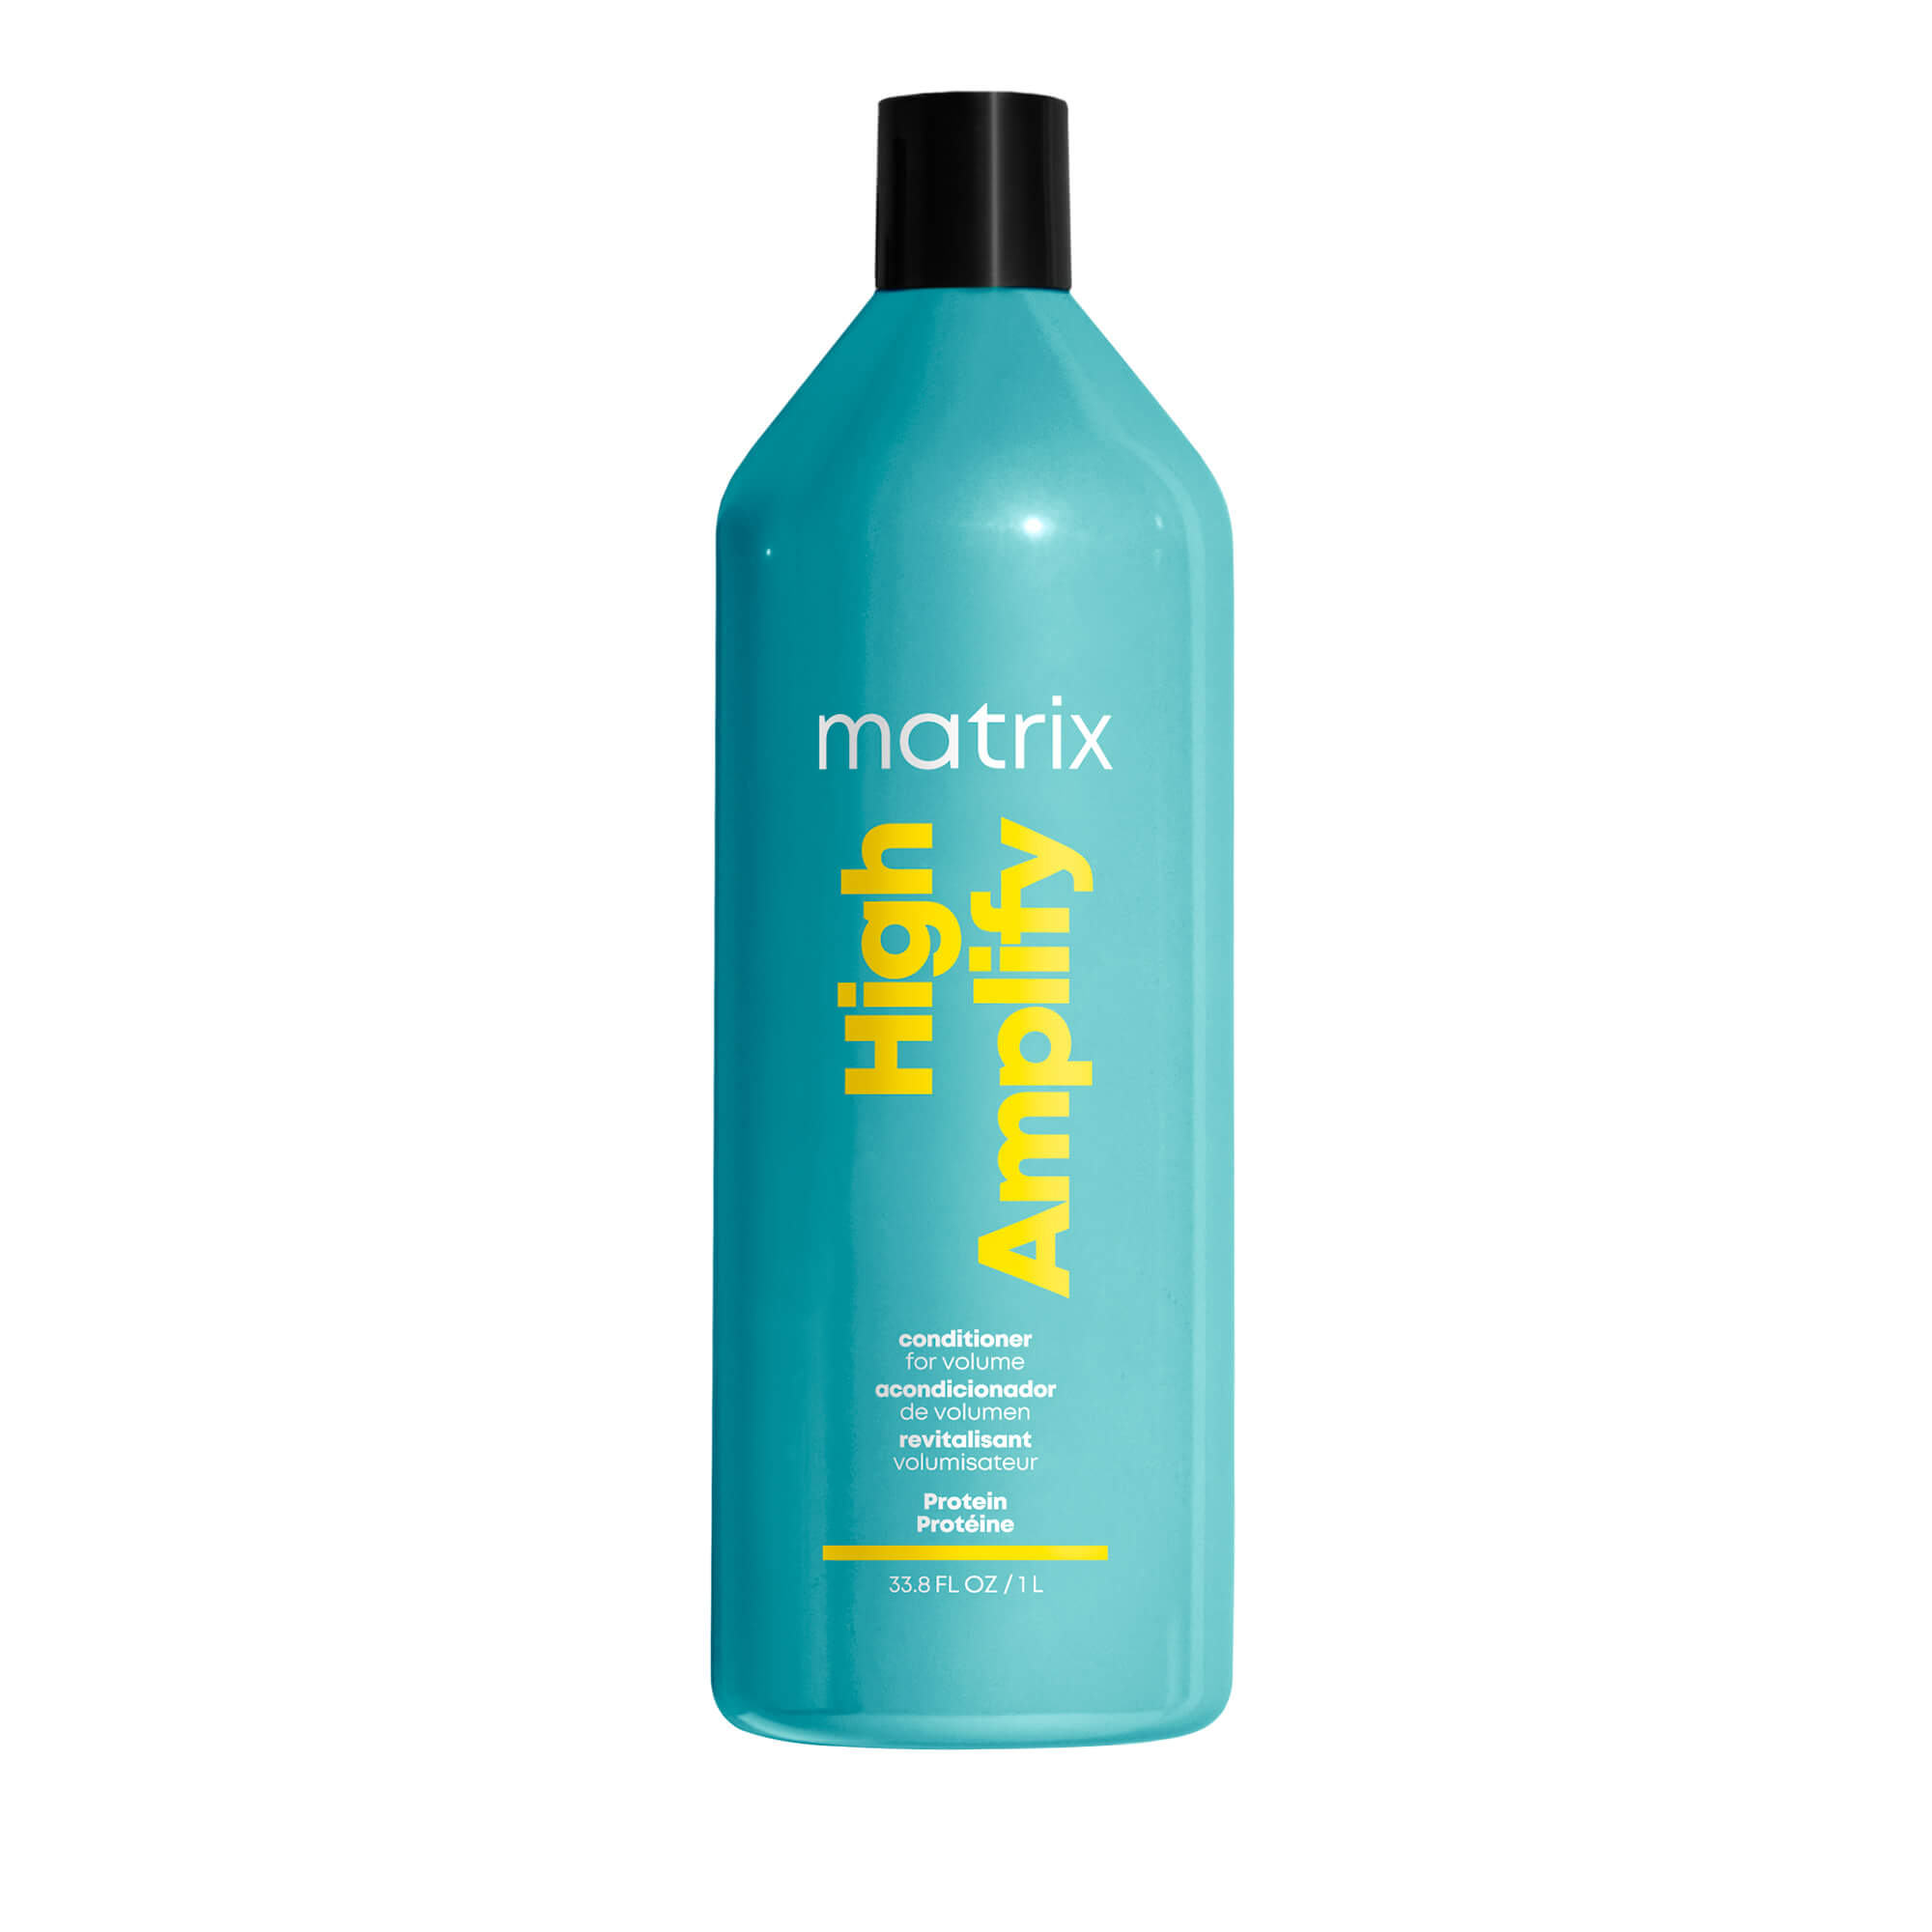 Matrix Total Results High Amplify Conditioner 